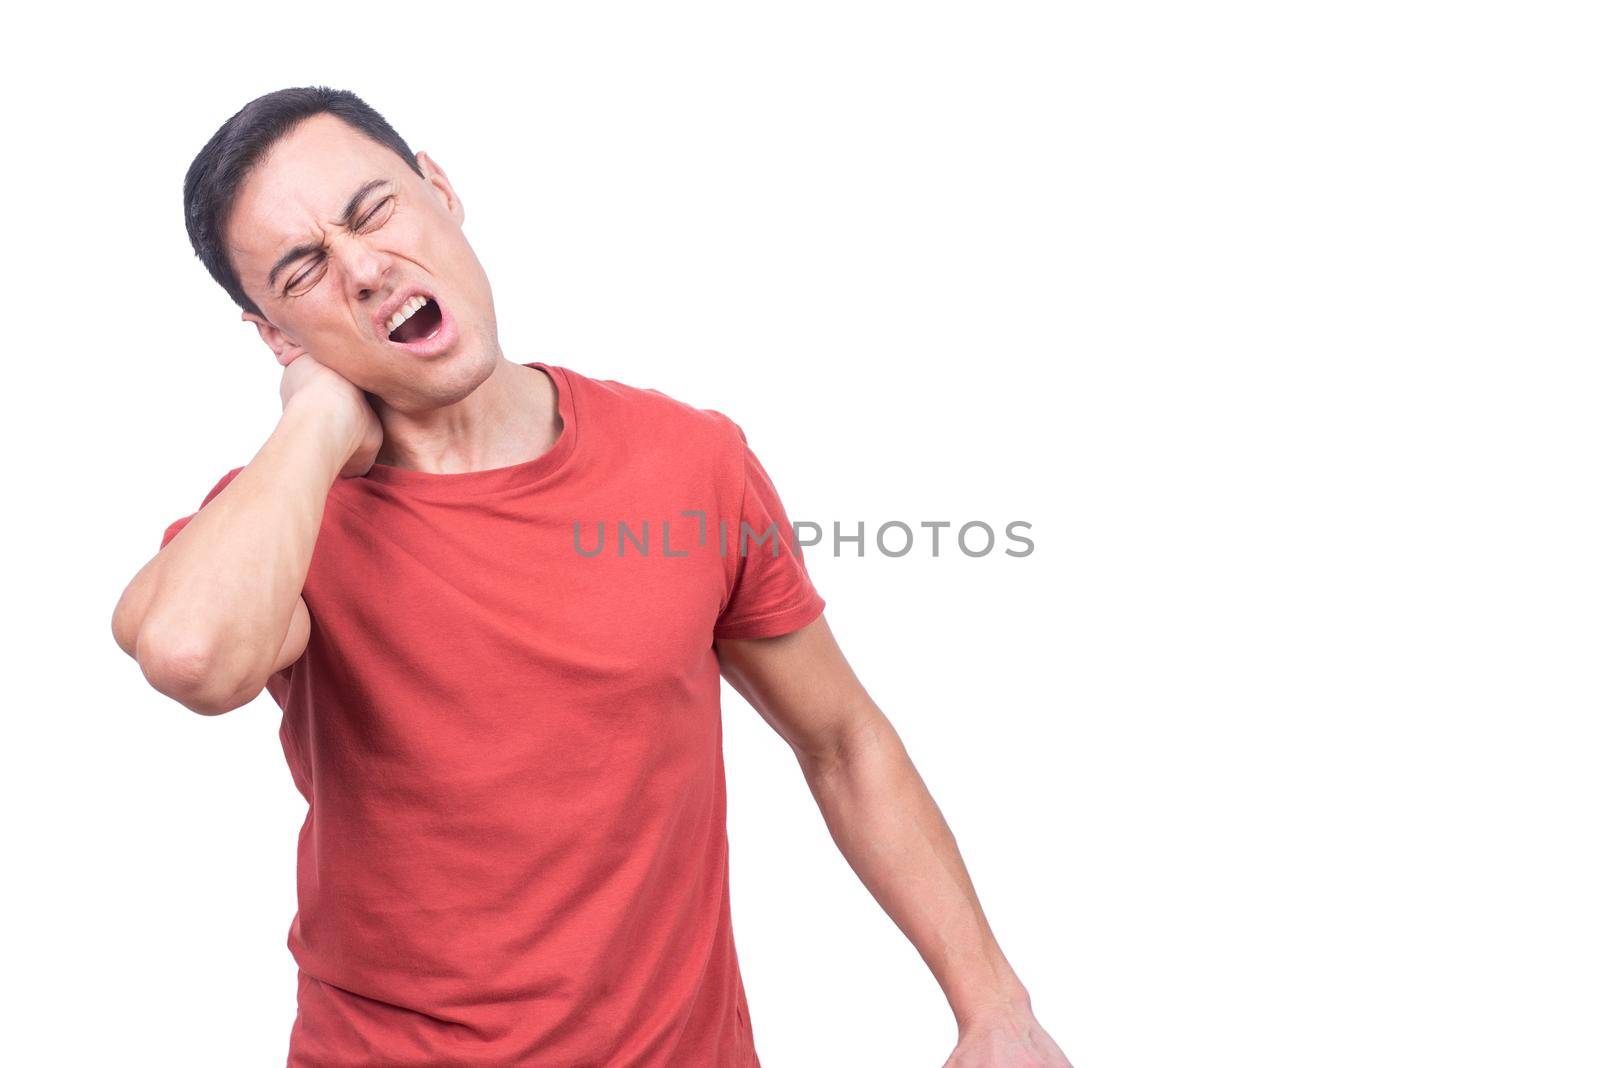 Brunet with closed eyes and opened mouth wearing red t shirt and massaging stiff neck while standing on white background